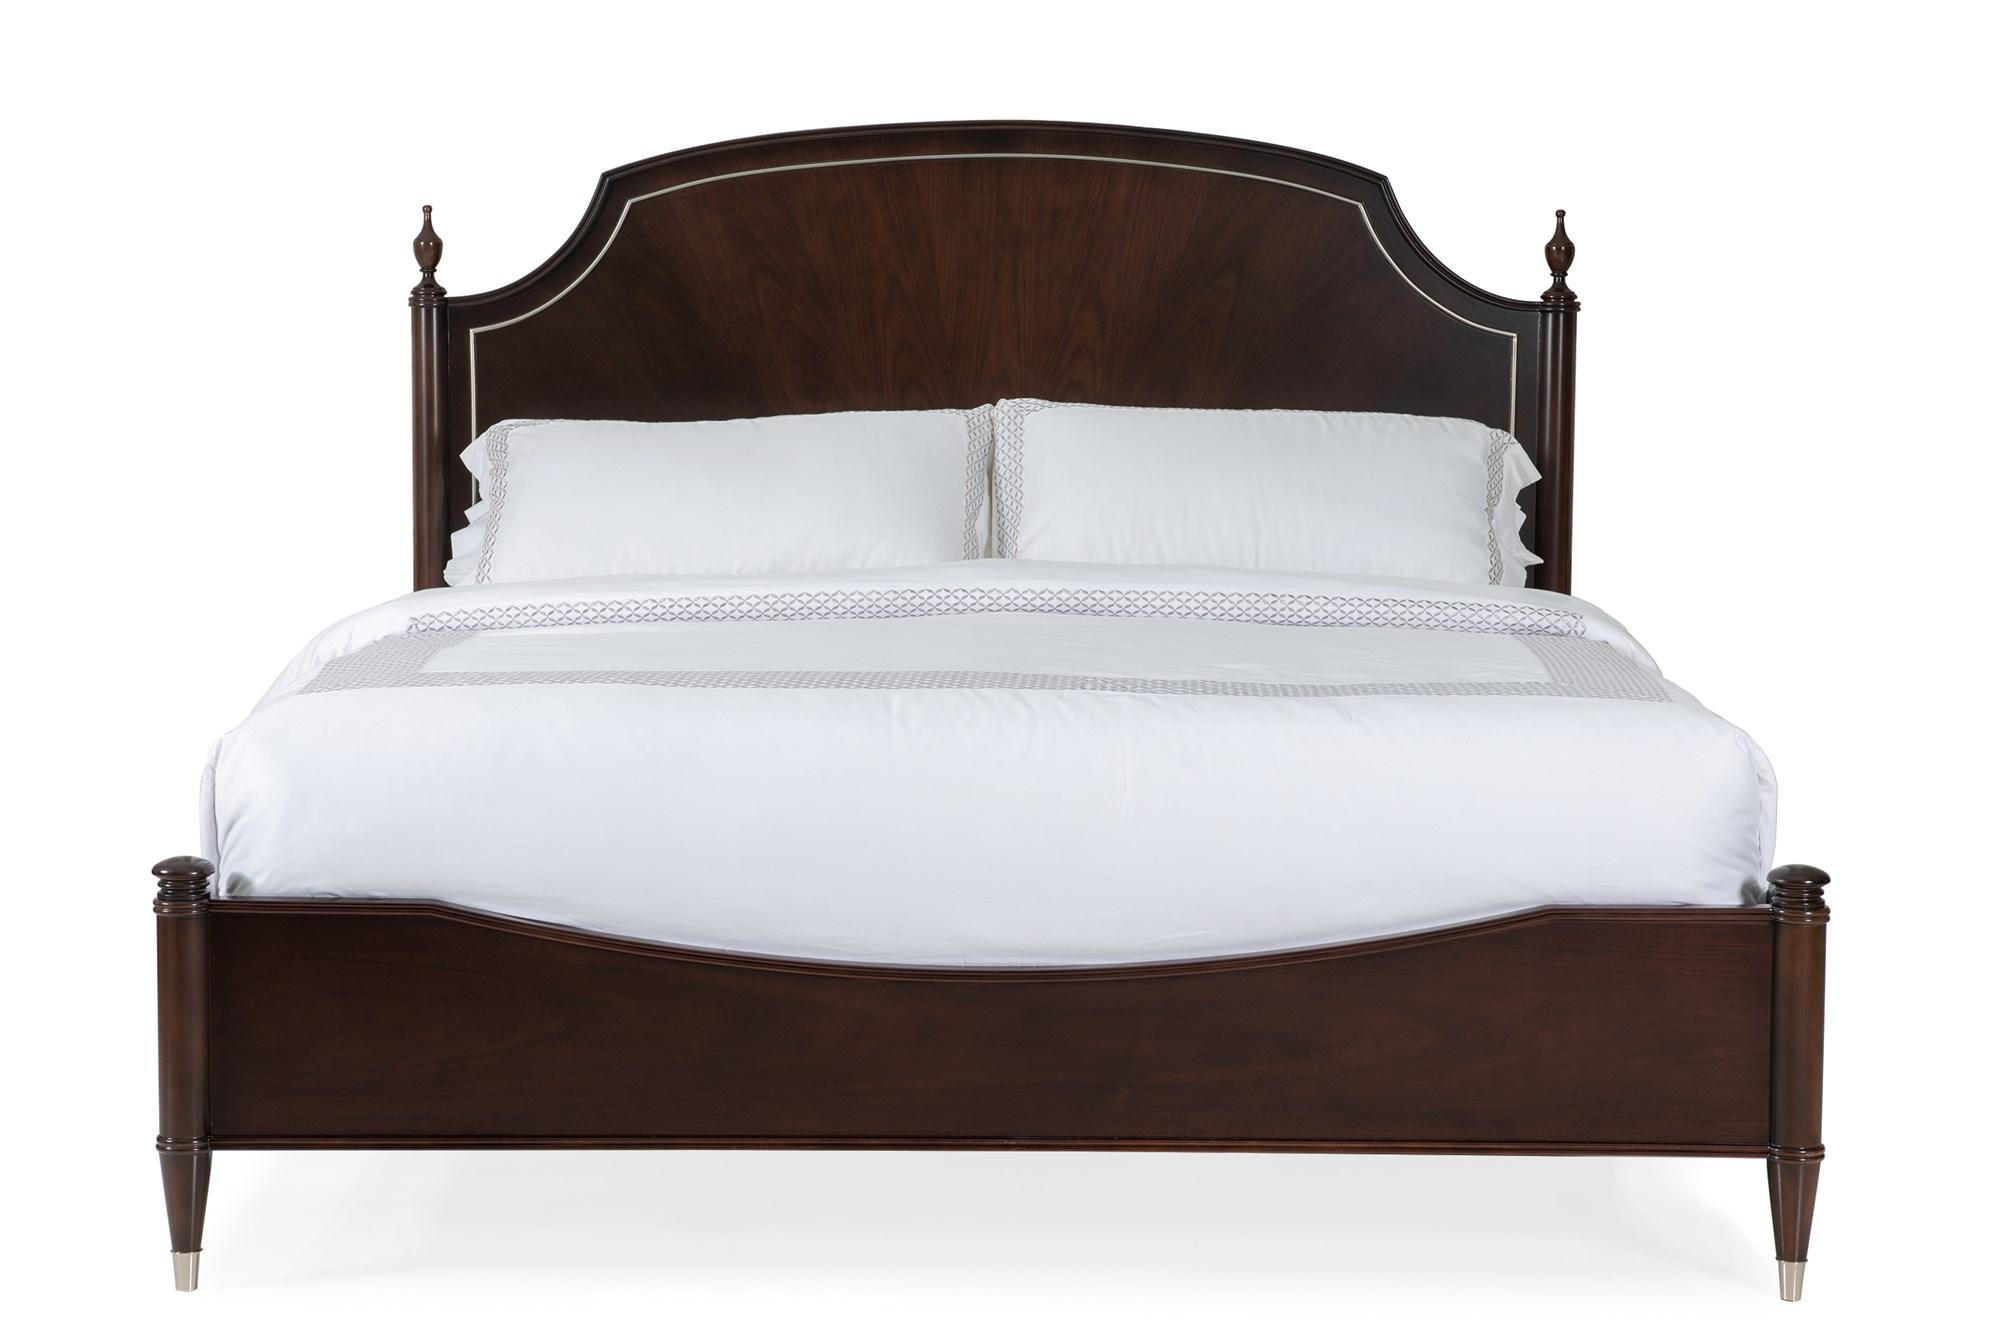 

    
Mocha Walnut & Soft Silver Paint Finish CAL King Bed SUITE DREAMS by Caracole
